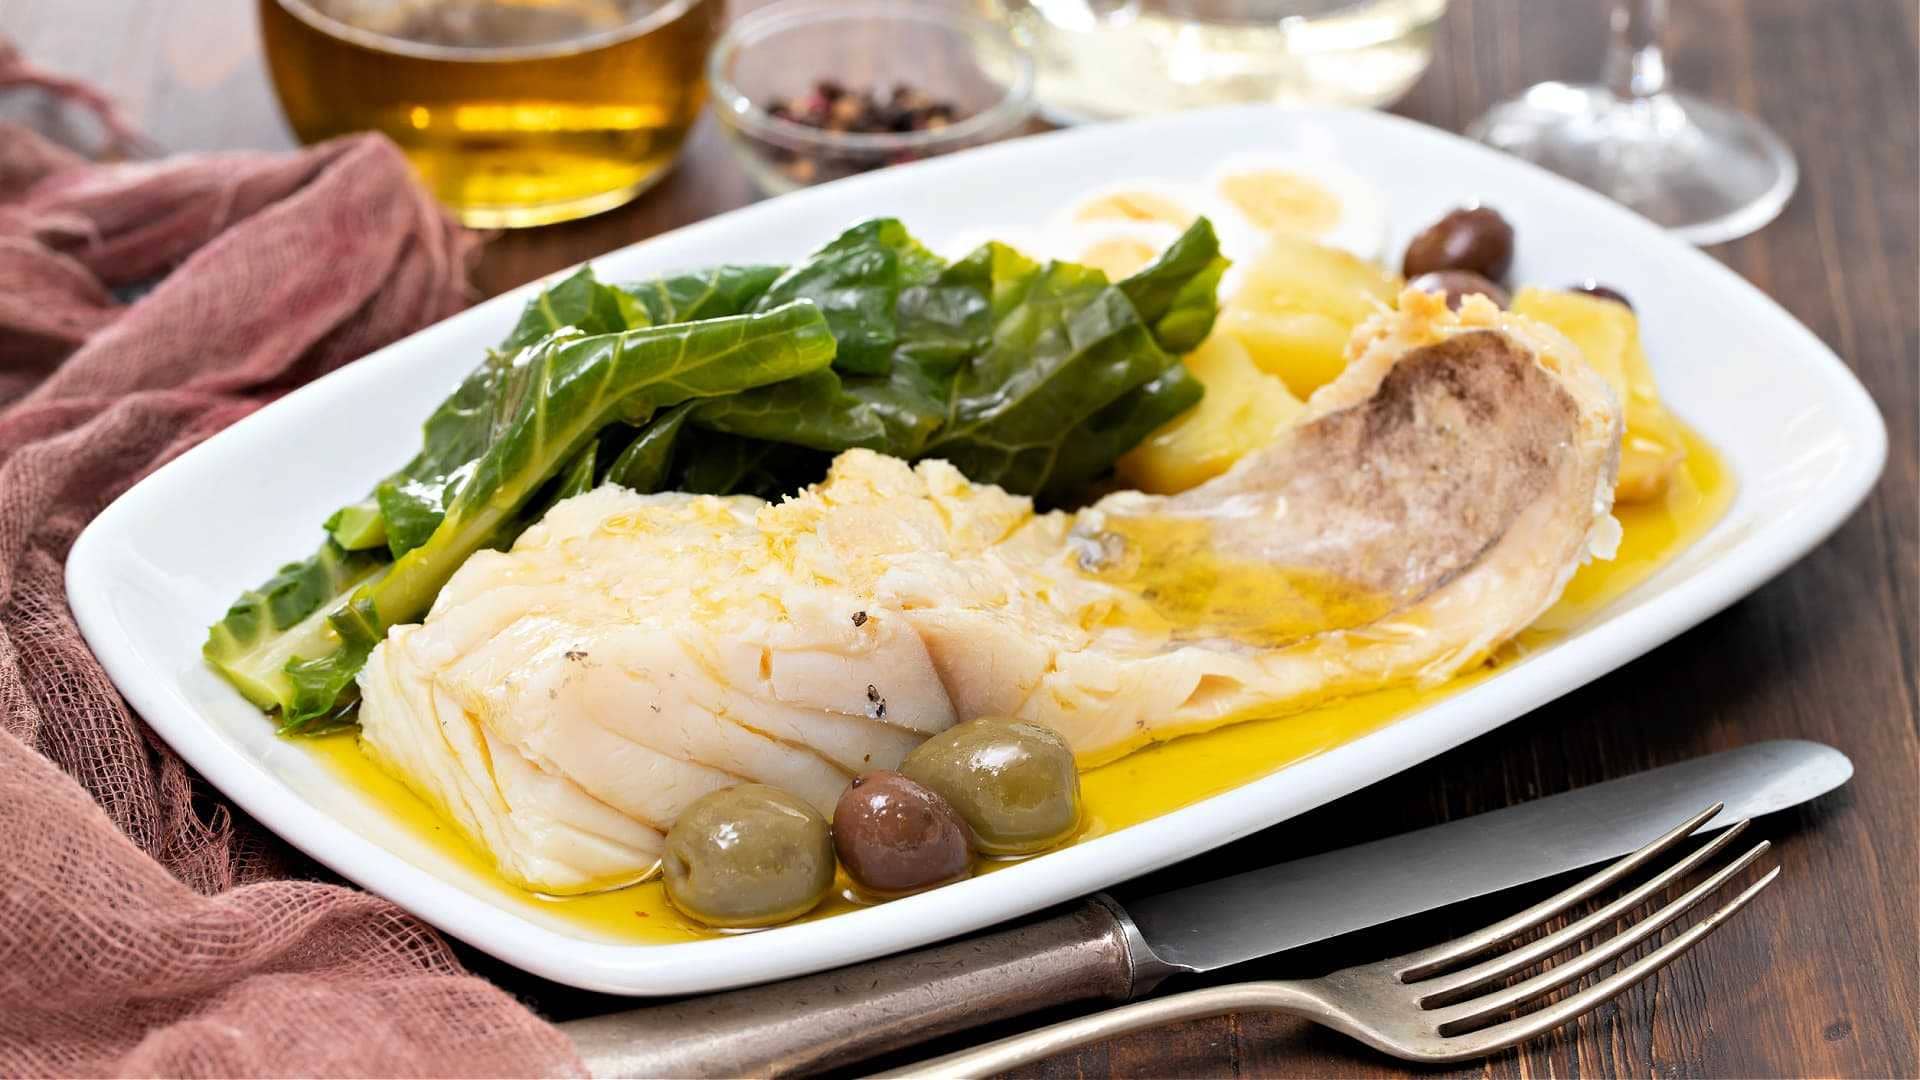 basics-pairing-extra-virgin-olive-oils-with-fish-and-meat-dishes-olive-oil-times